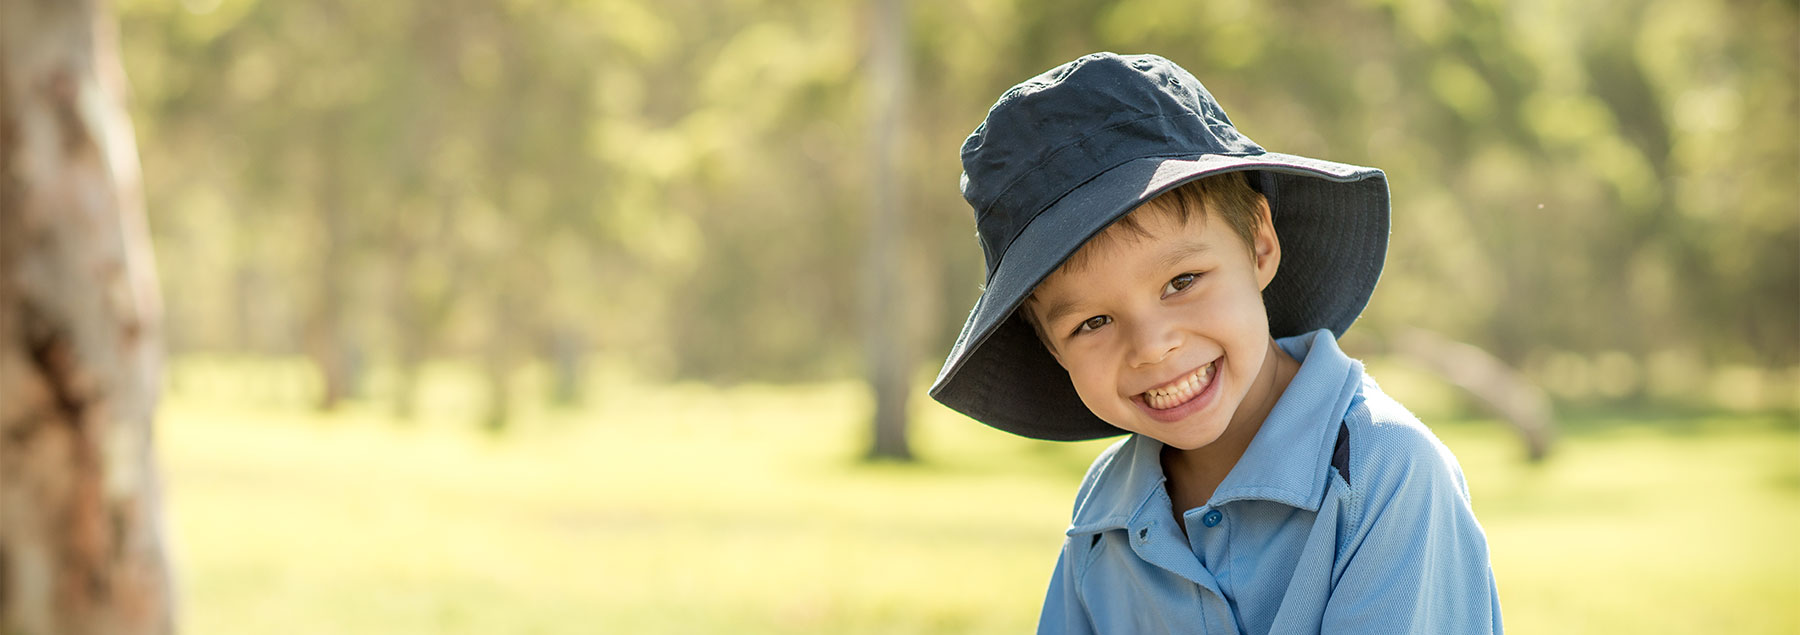 Child in blue hat at the park